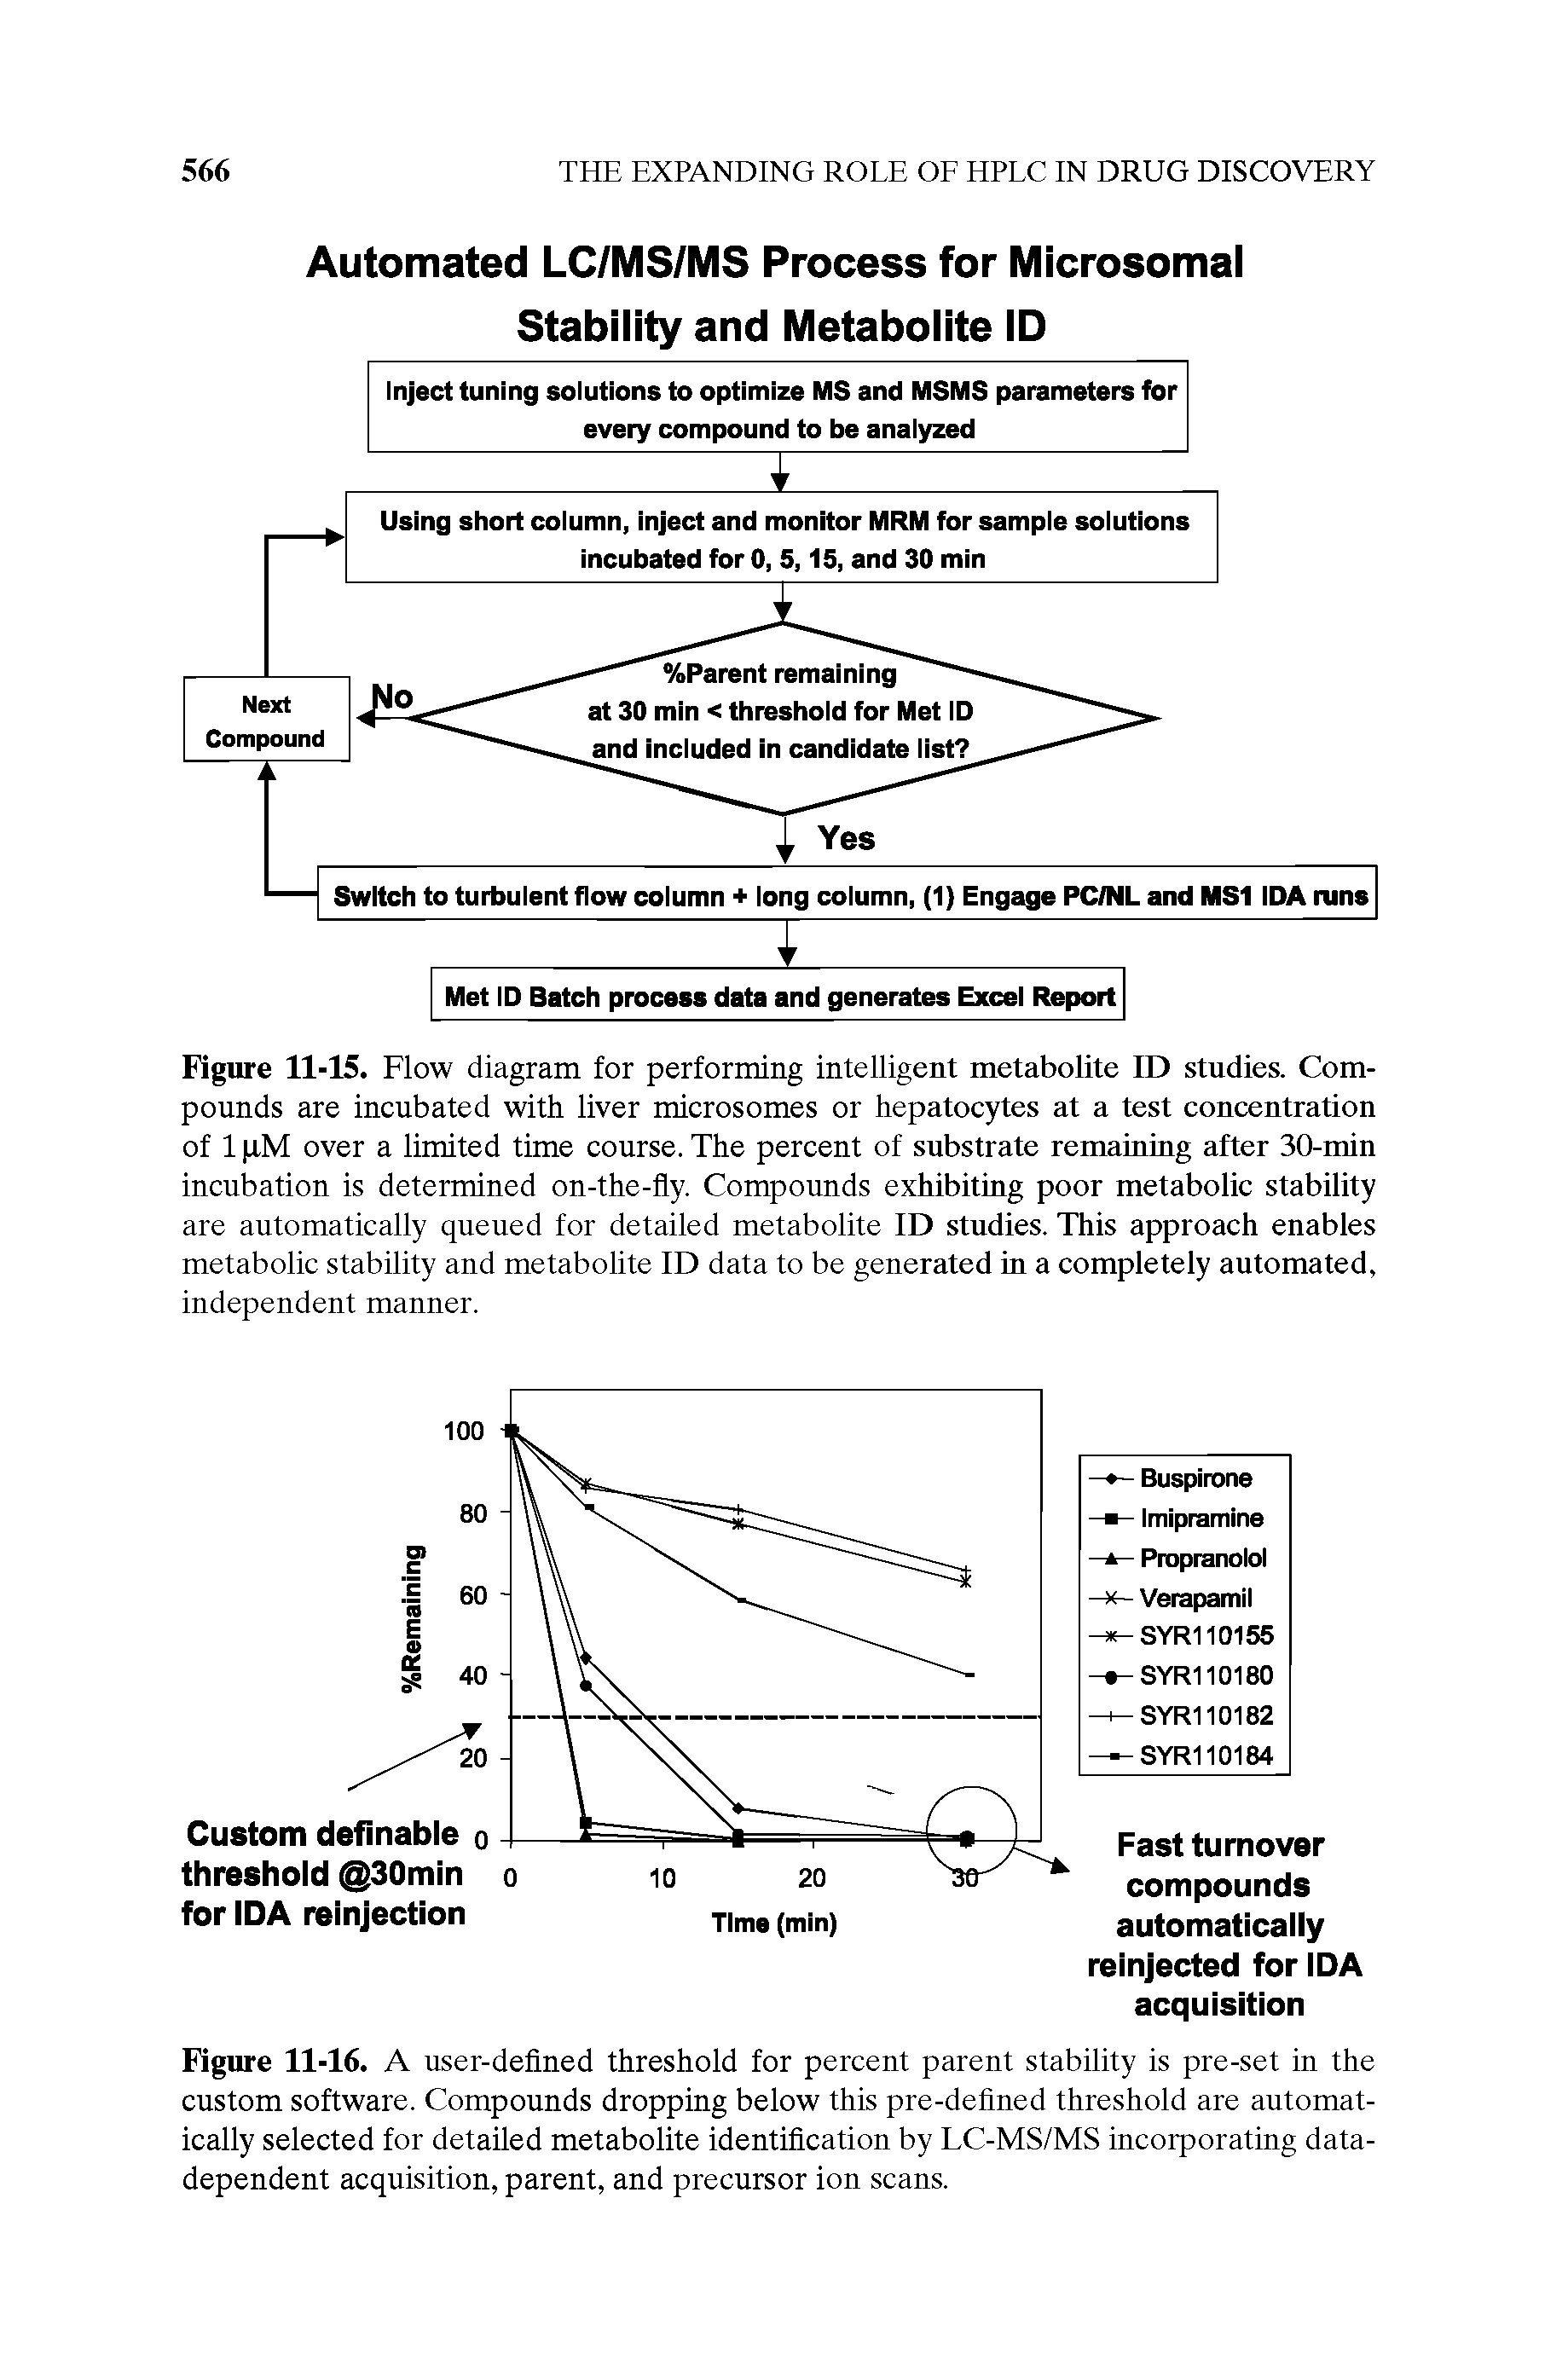 Figure 11-15. Flow diagram for performing intelligent metabolite ID studies. Compounds are incubated with liver microsomes or hepatocytes at a test concentration of 1 xM over a limited time course. The percent of substrate remaining after 30-min incubation is determined on-the-fly. Compounds exhibiting poor metabolic stability are automatically queued for detailed metabolite ID studies. This approach enables metabolic stability and metabolite ID data to be generated in a completely automated, independent manner.